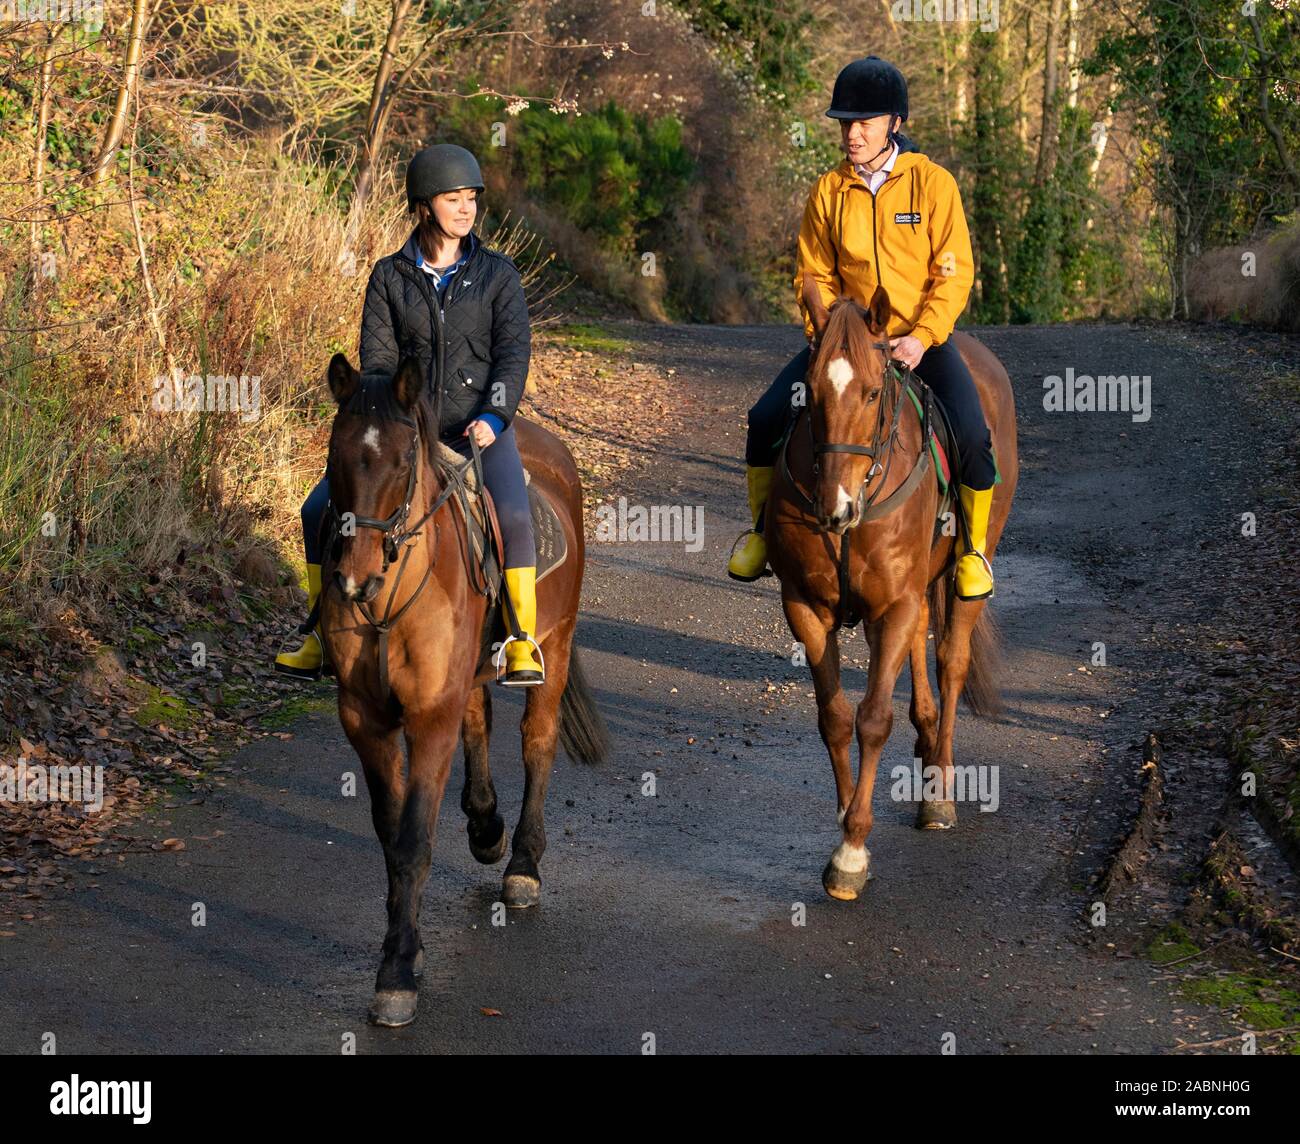 Lasswade, Scotland, UK. 28th November 2019. Liberal Democrats  highlight “two horse race in many seats” at Lasswade horse riding school. Scottish Liberal Democrat Leader Willie Rennie and candidate for Berwickshire, Roxburgh & Selkirk, Jenny Marr, visited the Lasswade riding centre to highlight the Lib Dems’ place as the lead contender in many seats across Scotland. Iain Masterton/Alamy Live News. Stock Photo